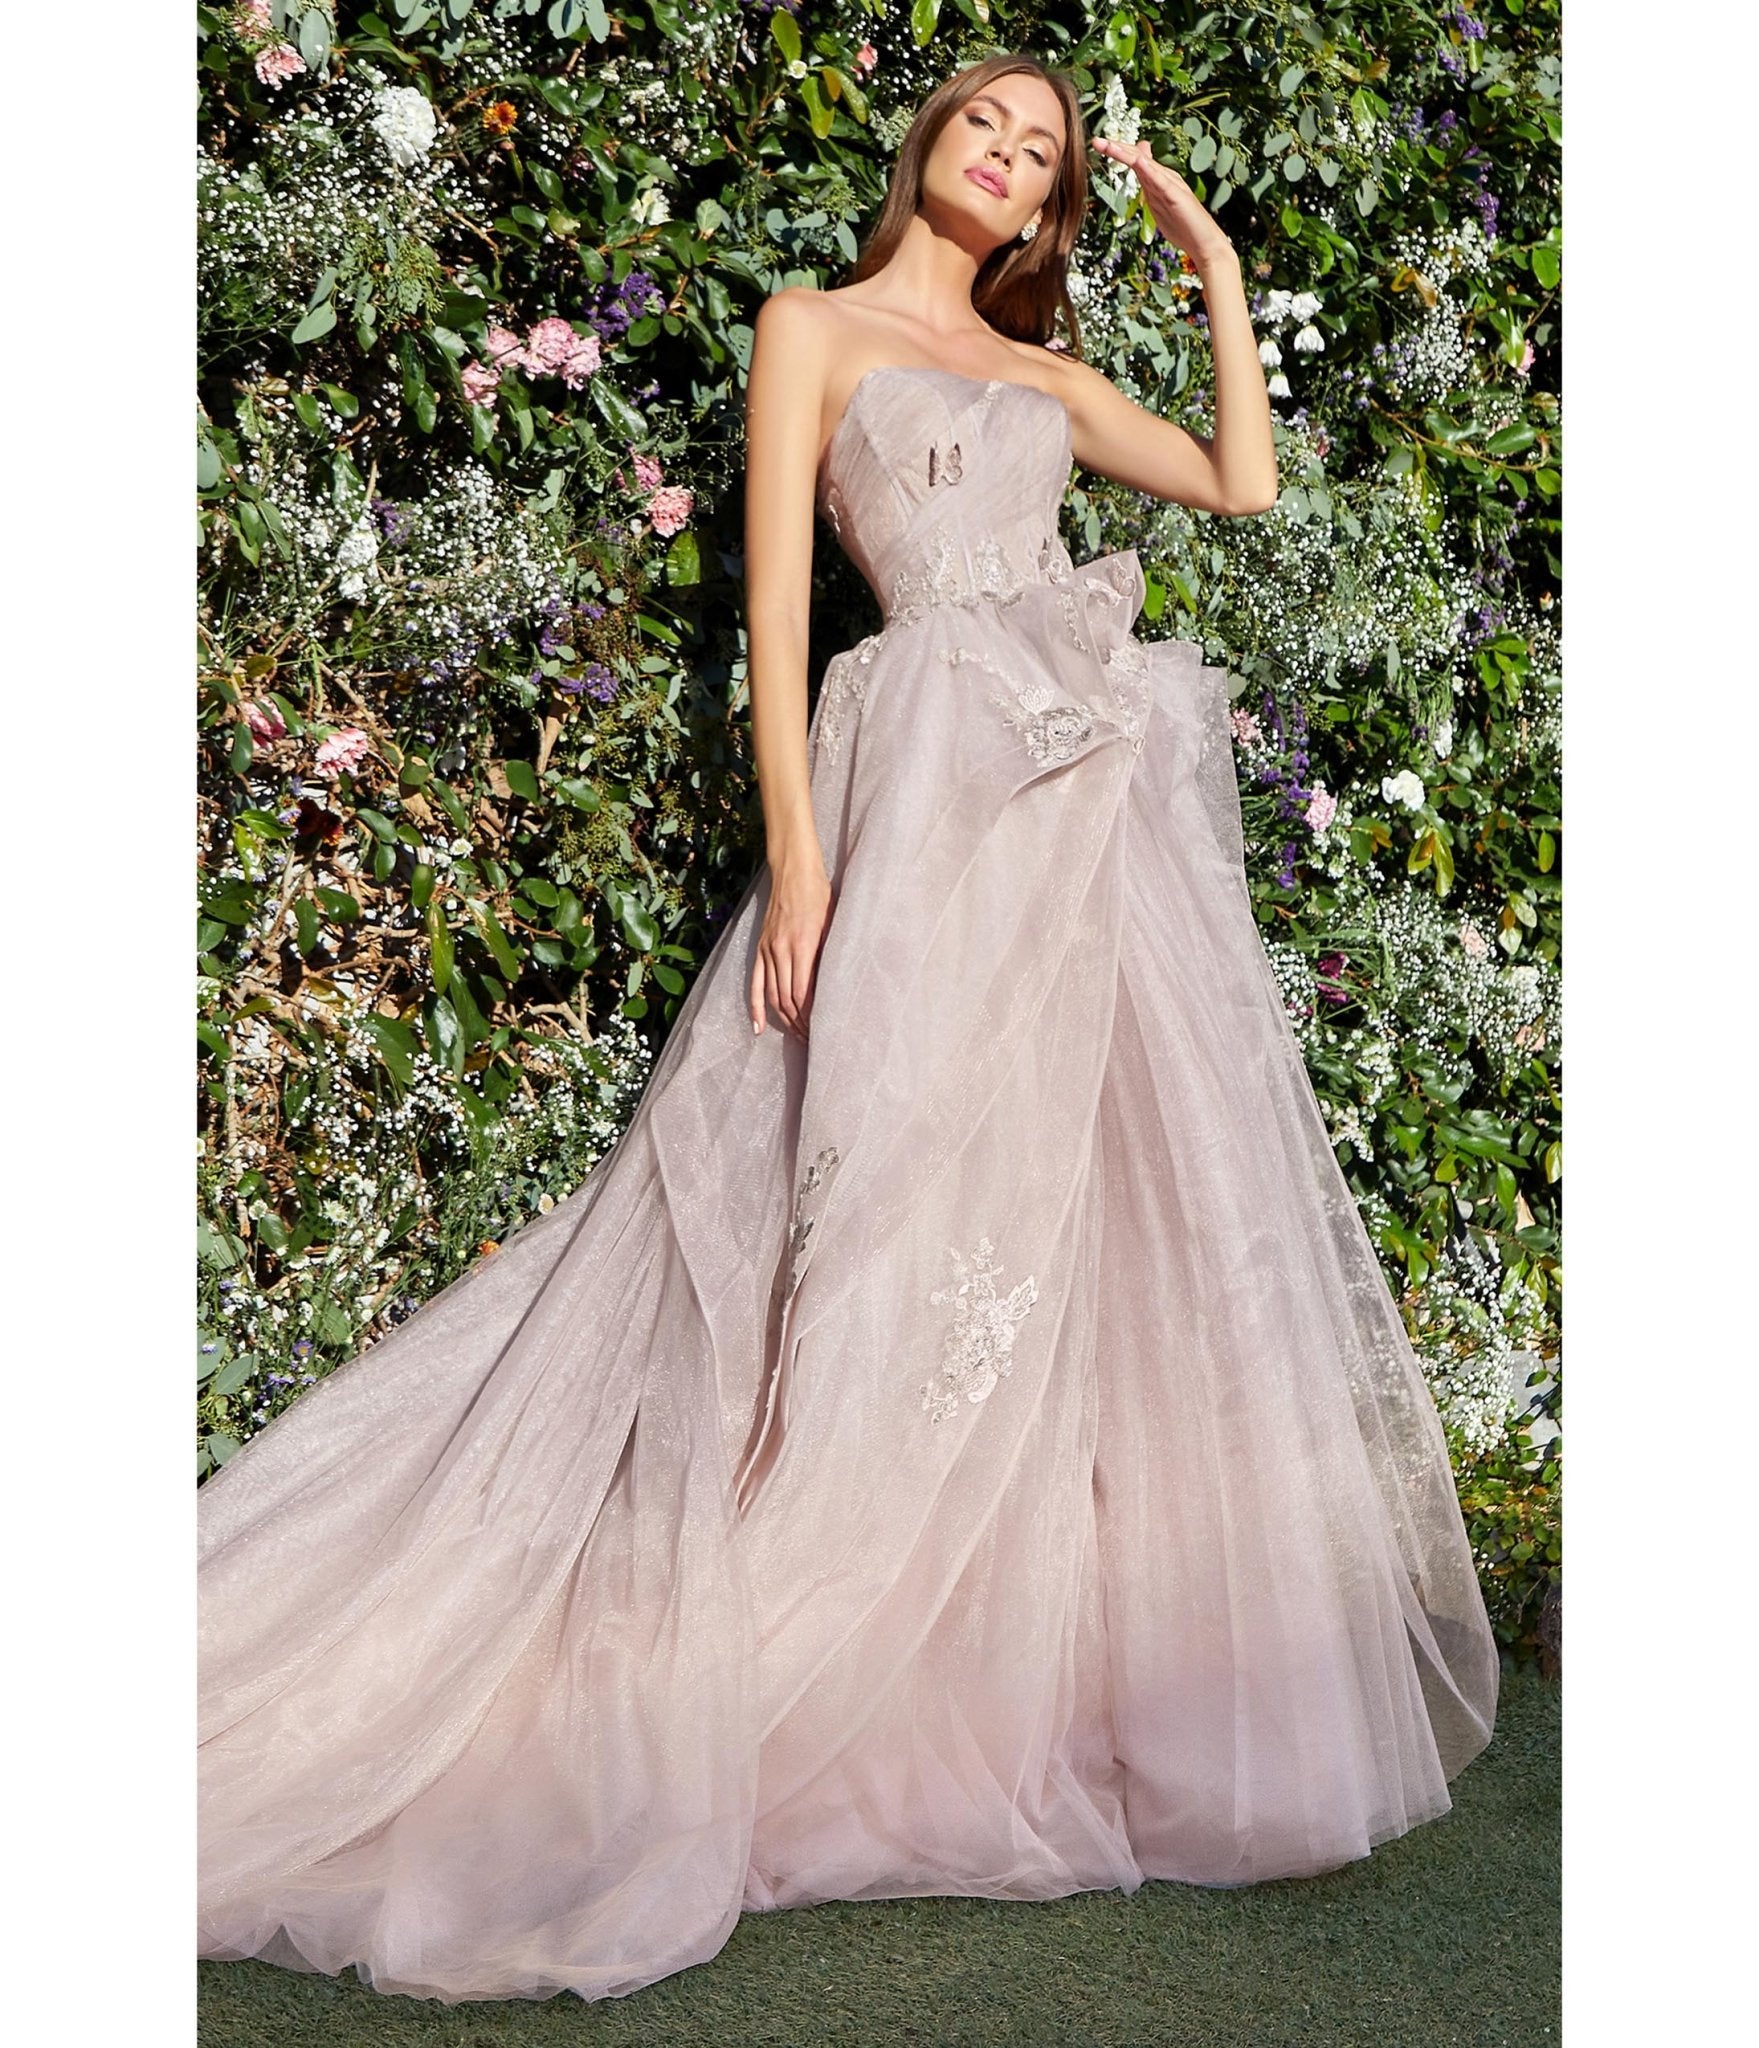 Pale Mauve Monarch Butterfly Embellished Tulle Evening Gown - Unique Vintage - Womens, DRESSES, PROM AND SPECIAL OCCASION